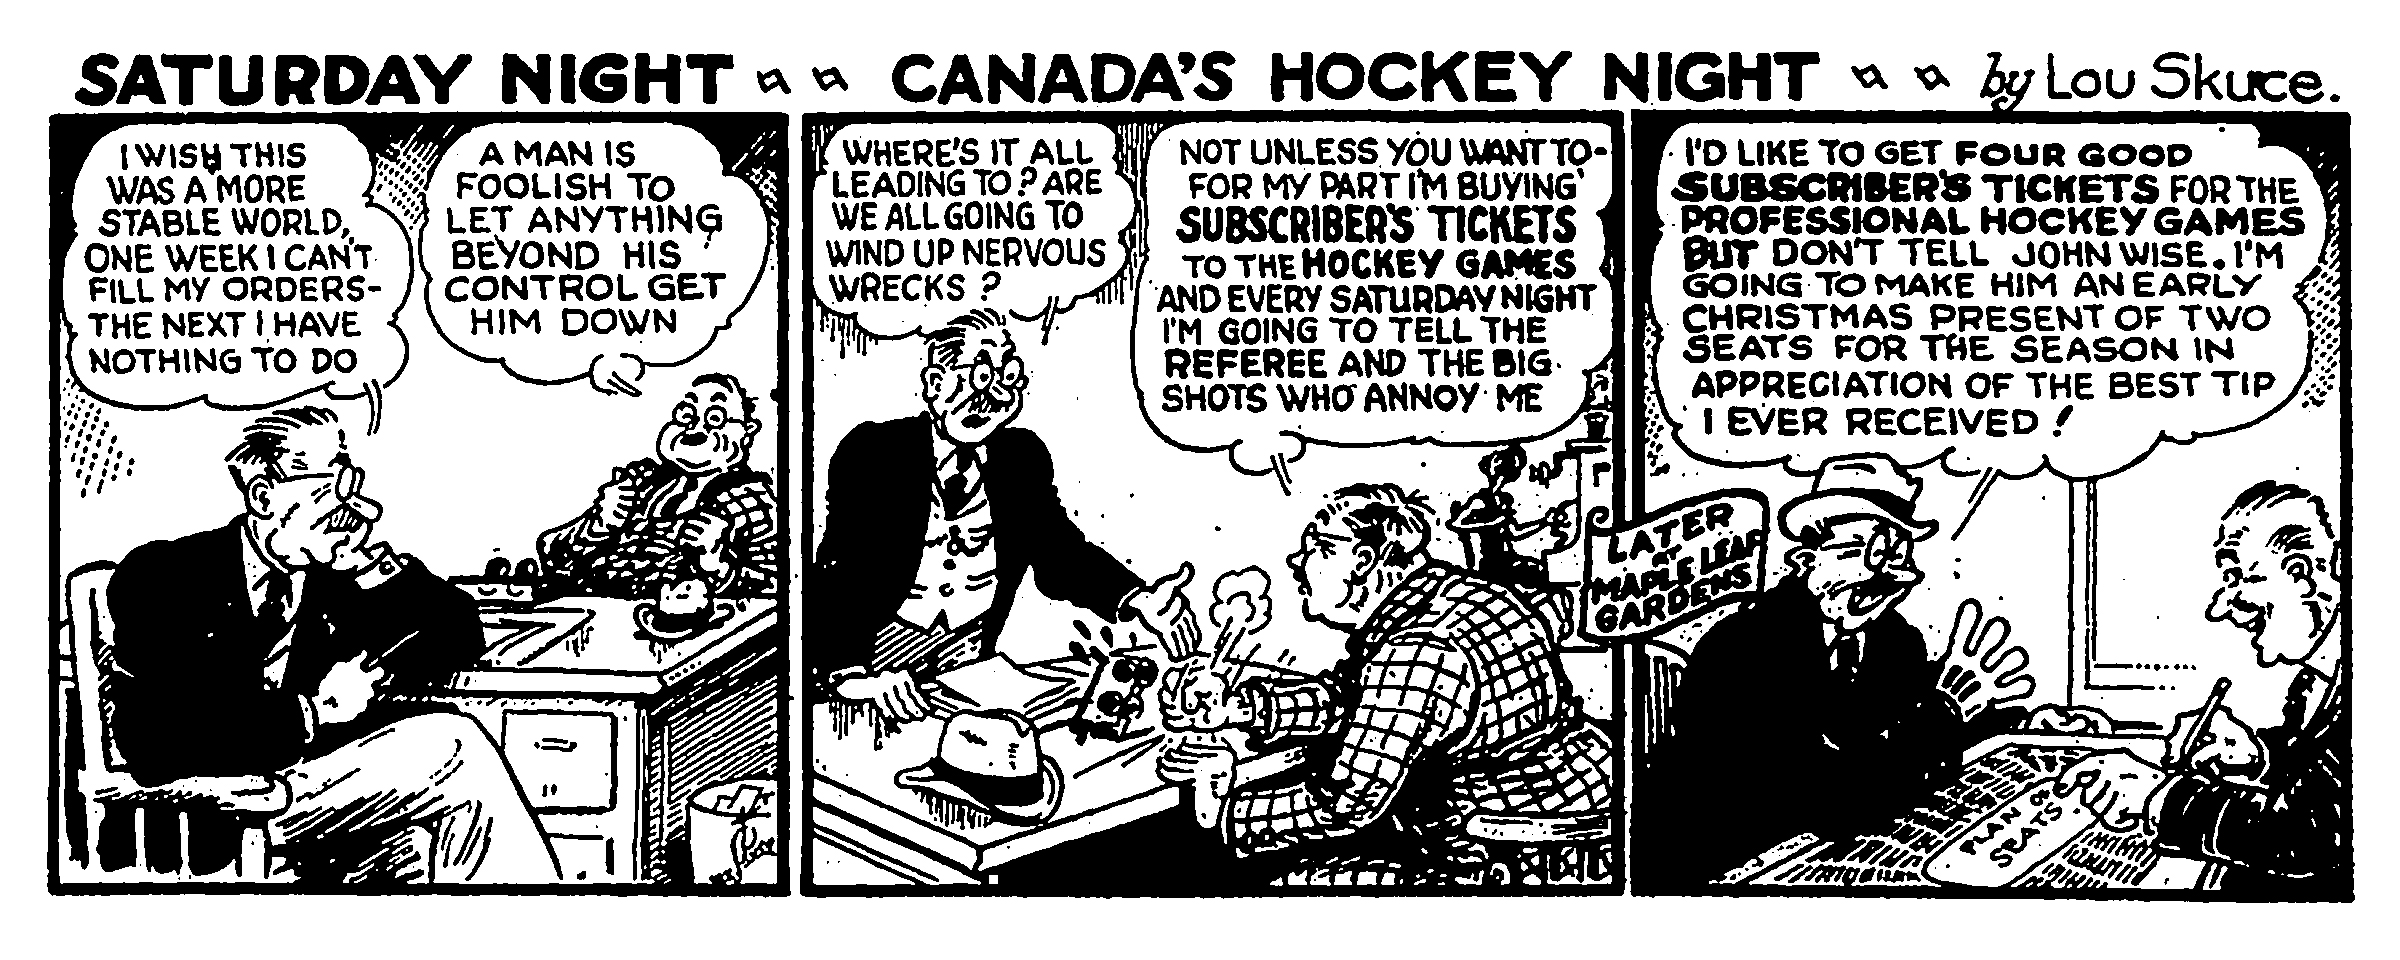 Toronto Maple Leafs ad by Lou Skuce, October 26, 1940